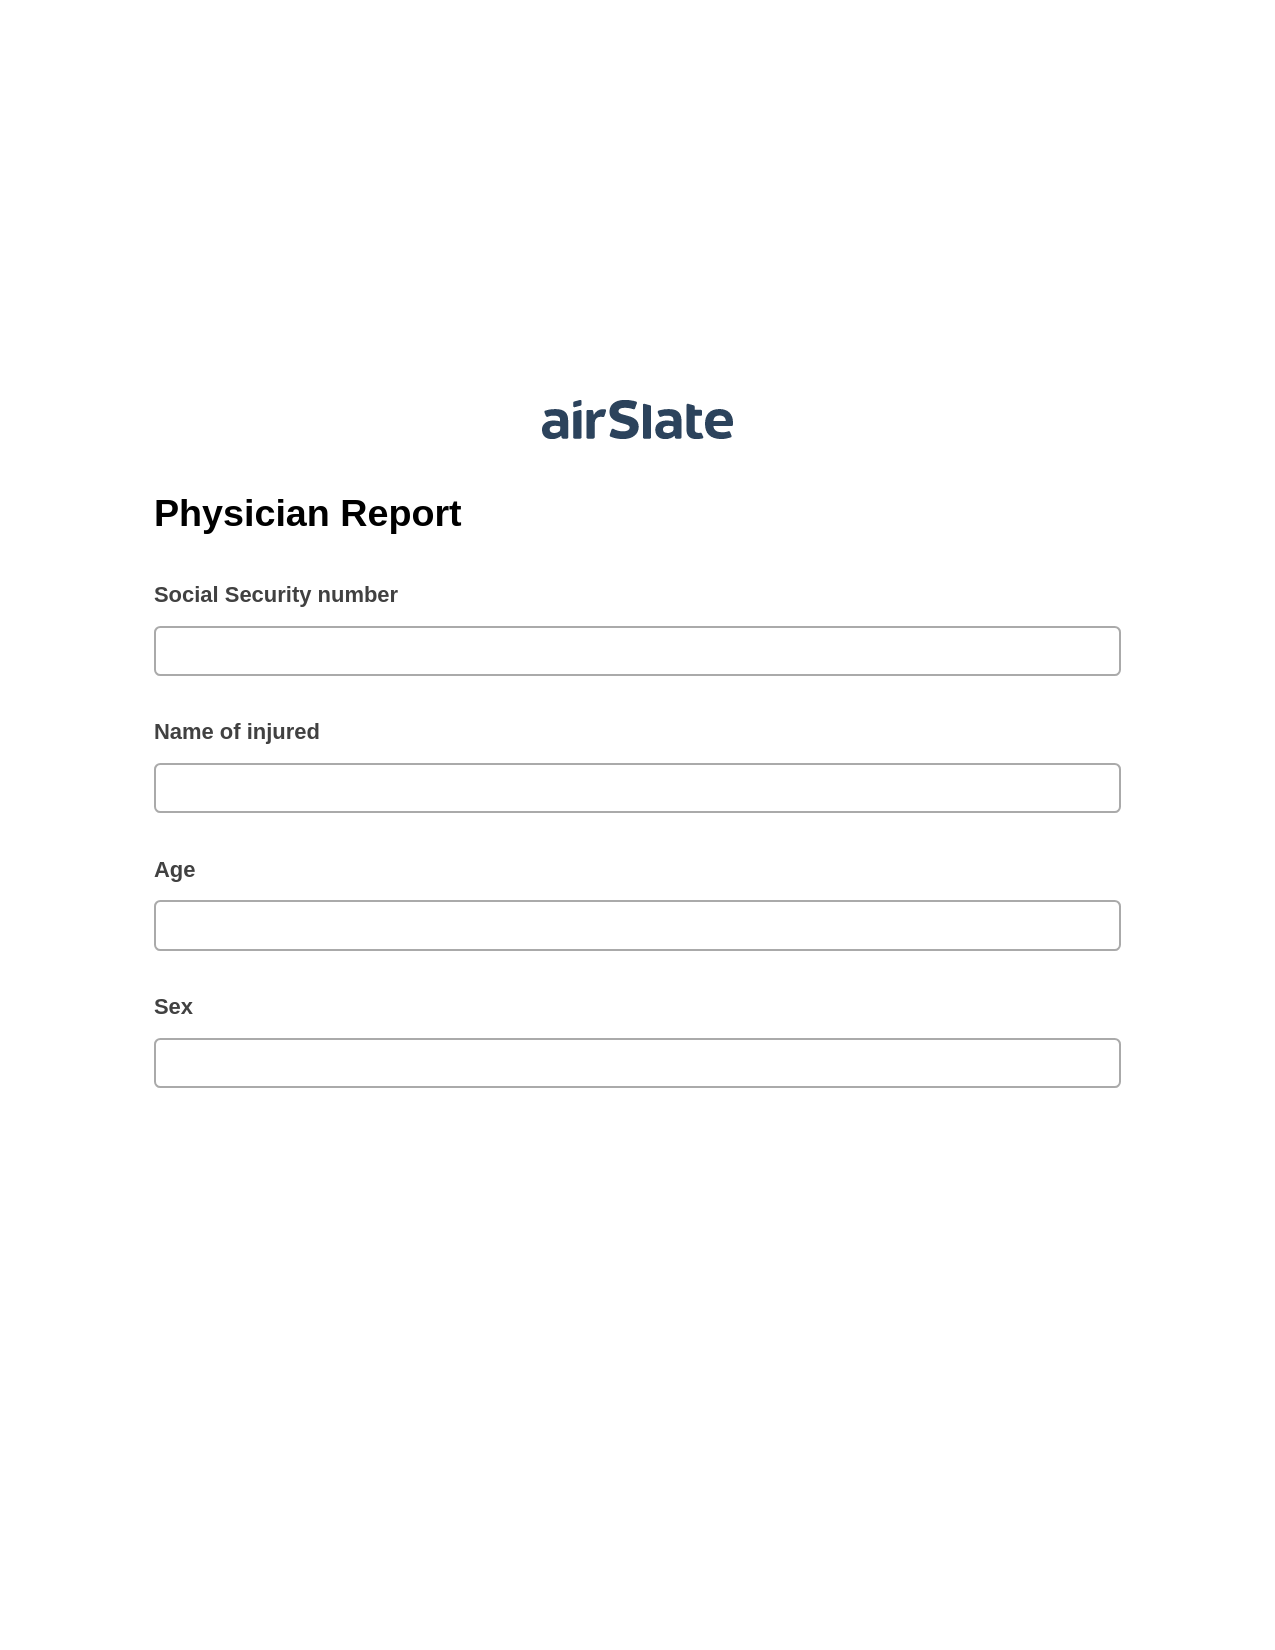 Physician Report Pre-fill from Excel Spreadsheet Bot, Update NetSuite Record Bot, Export to Smartsheet